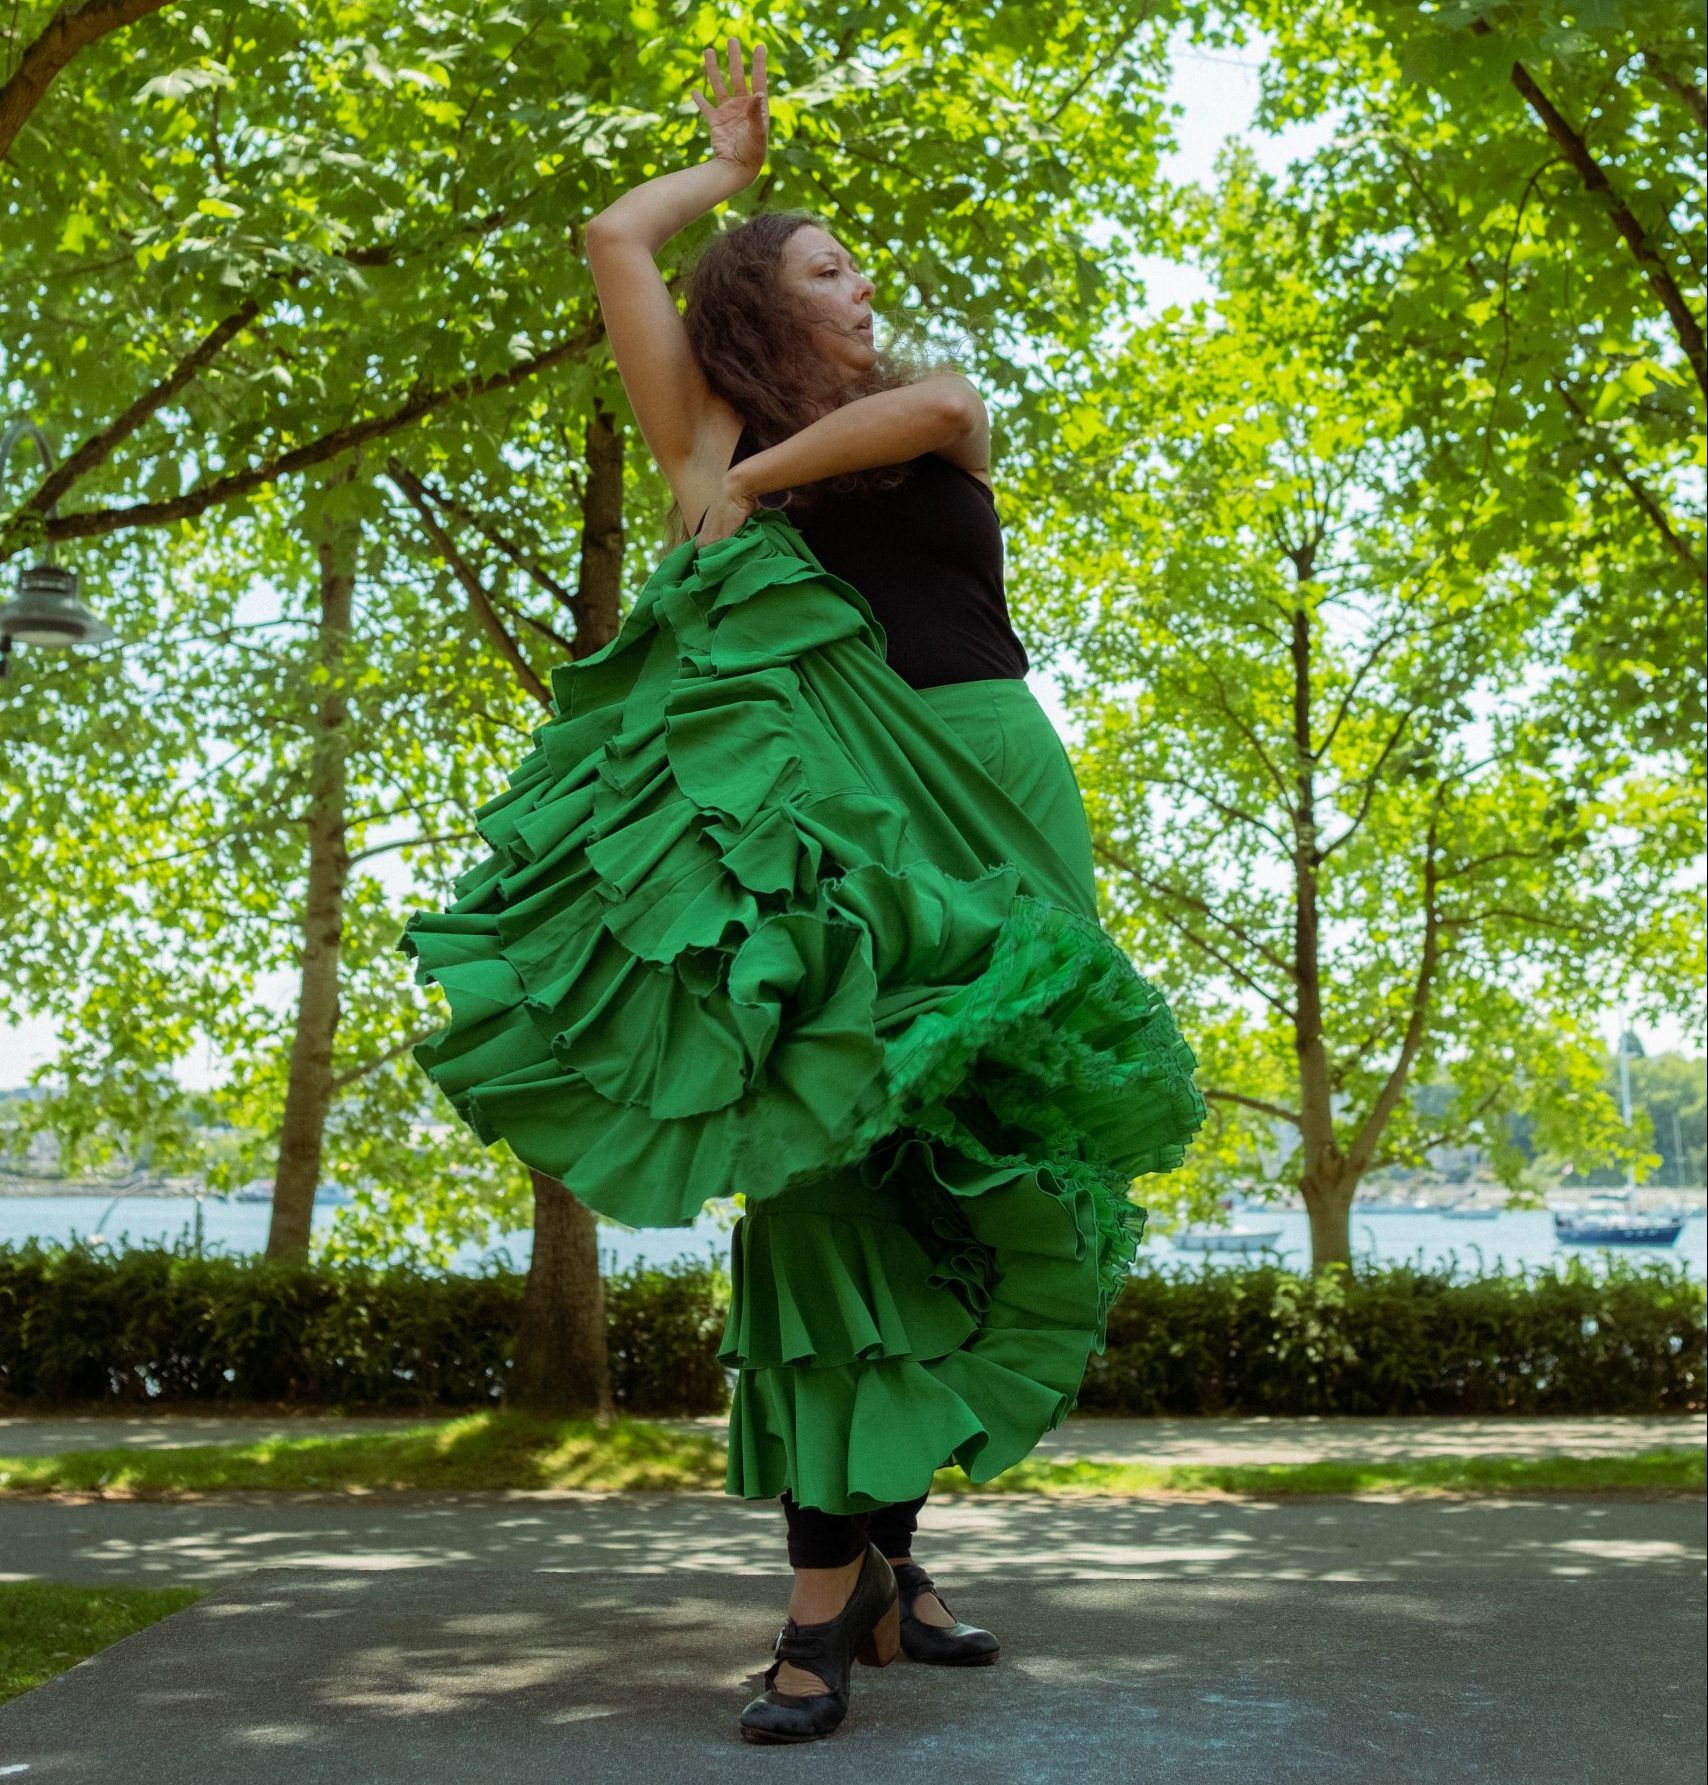 A flamenco dancer poses in a park. She is wearing a green traditional skirt that she is holding up with her left arm. Her right arm is bent above her head and she is looking out to the left.